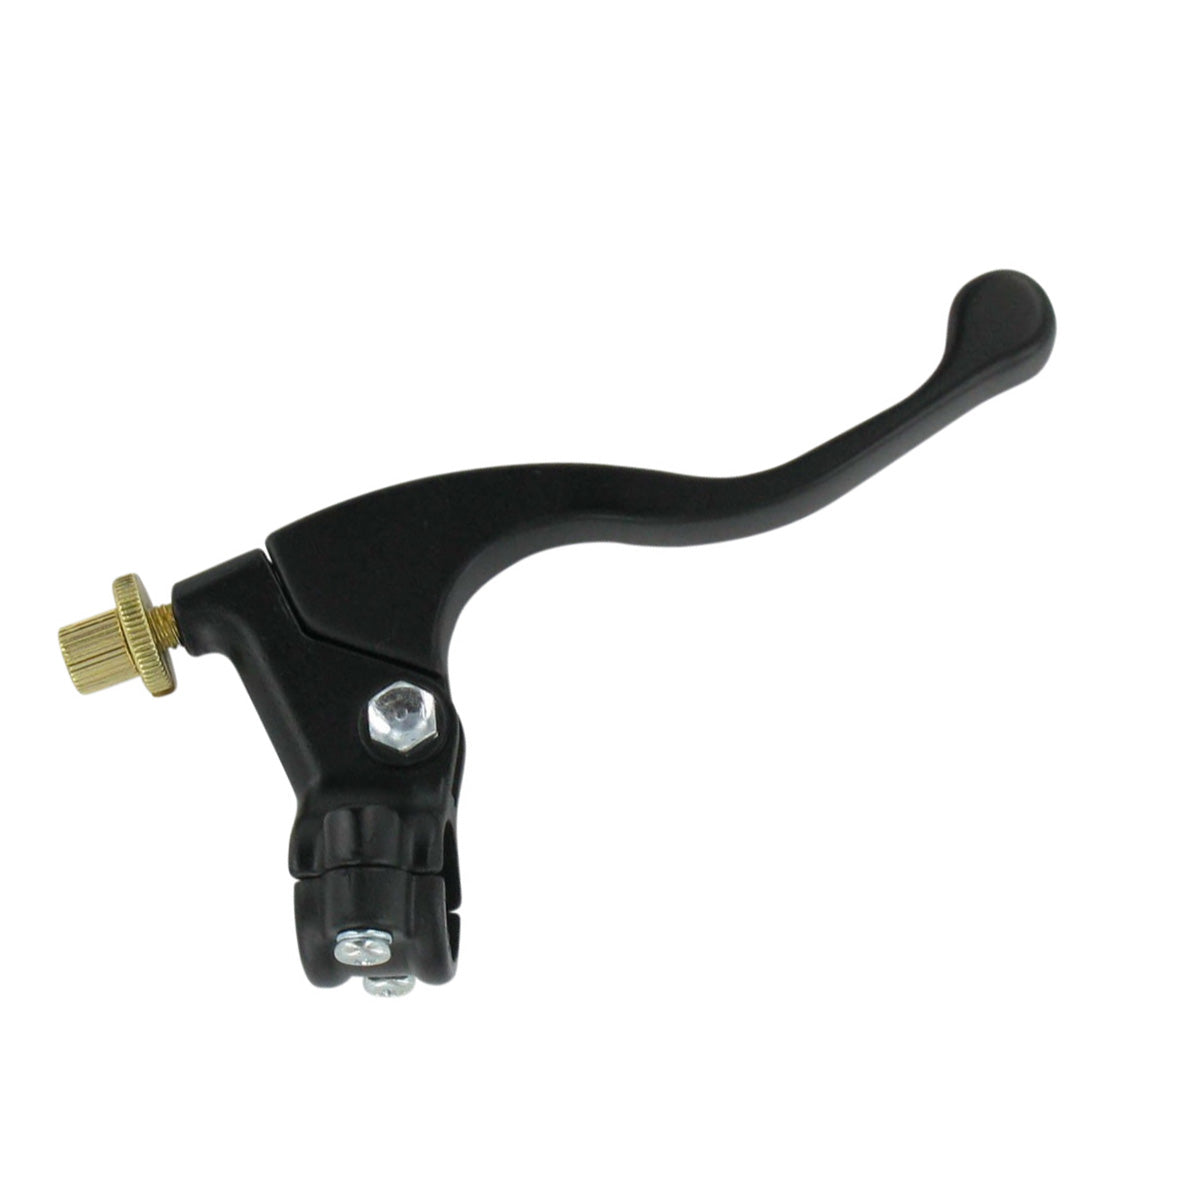 Parts Unlimited Shorty Brake Lever